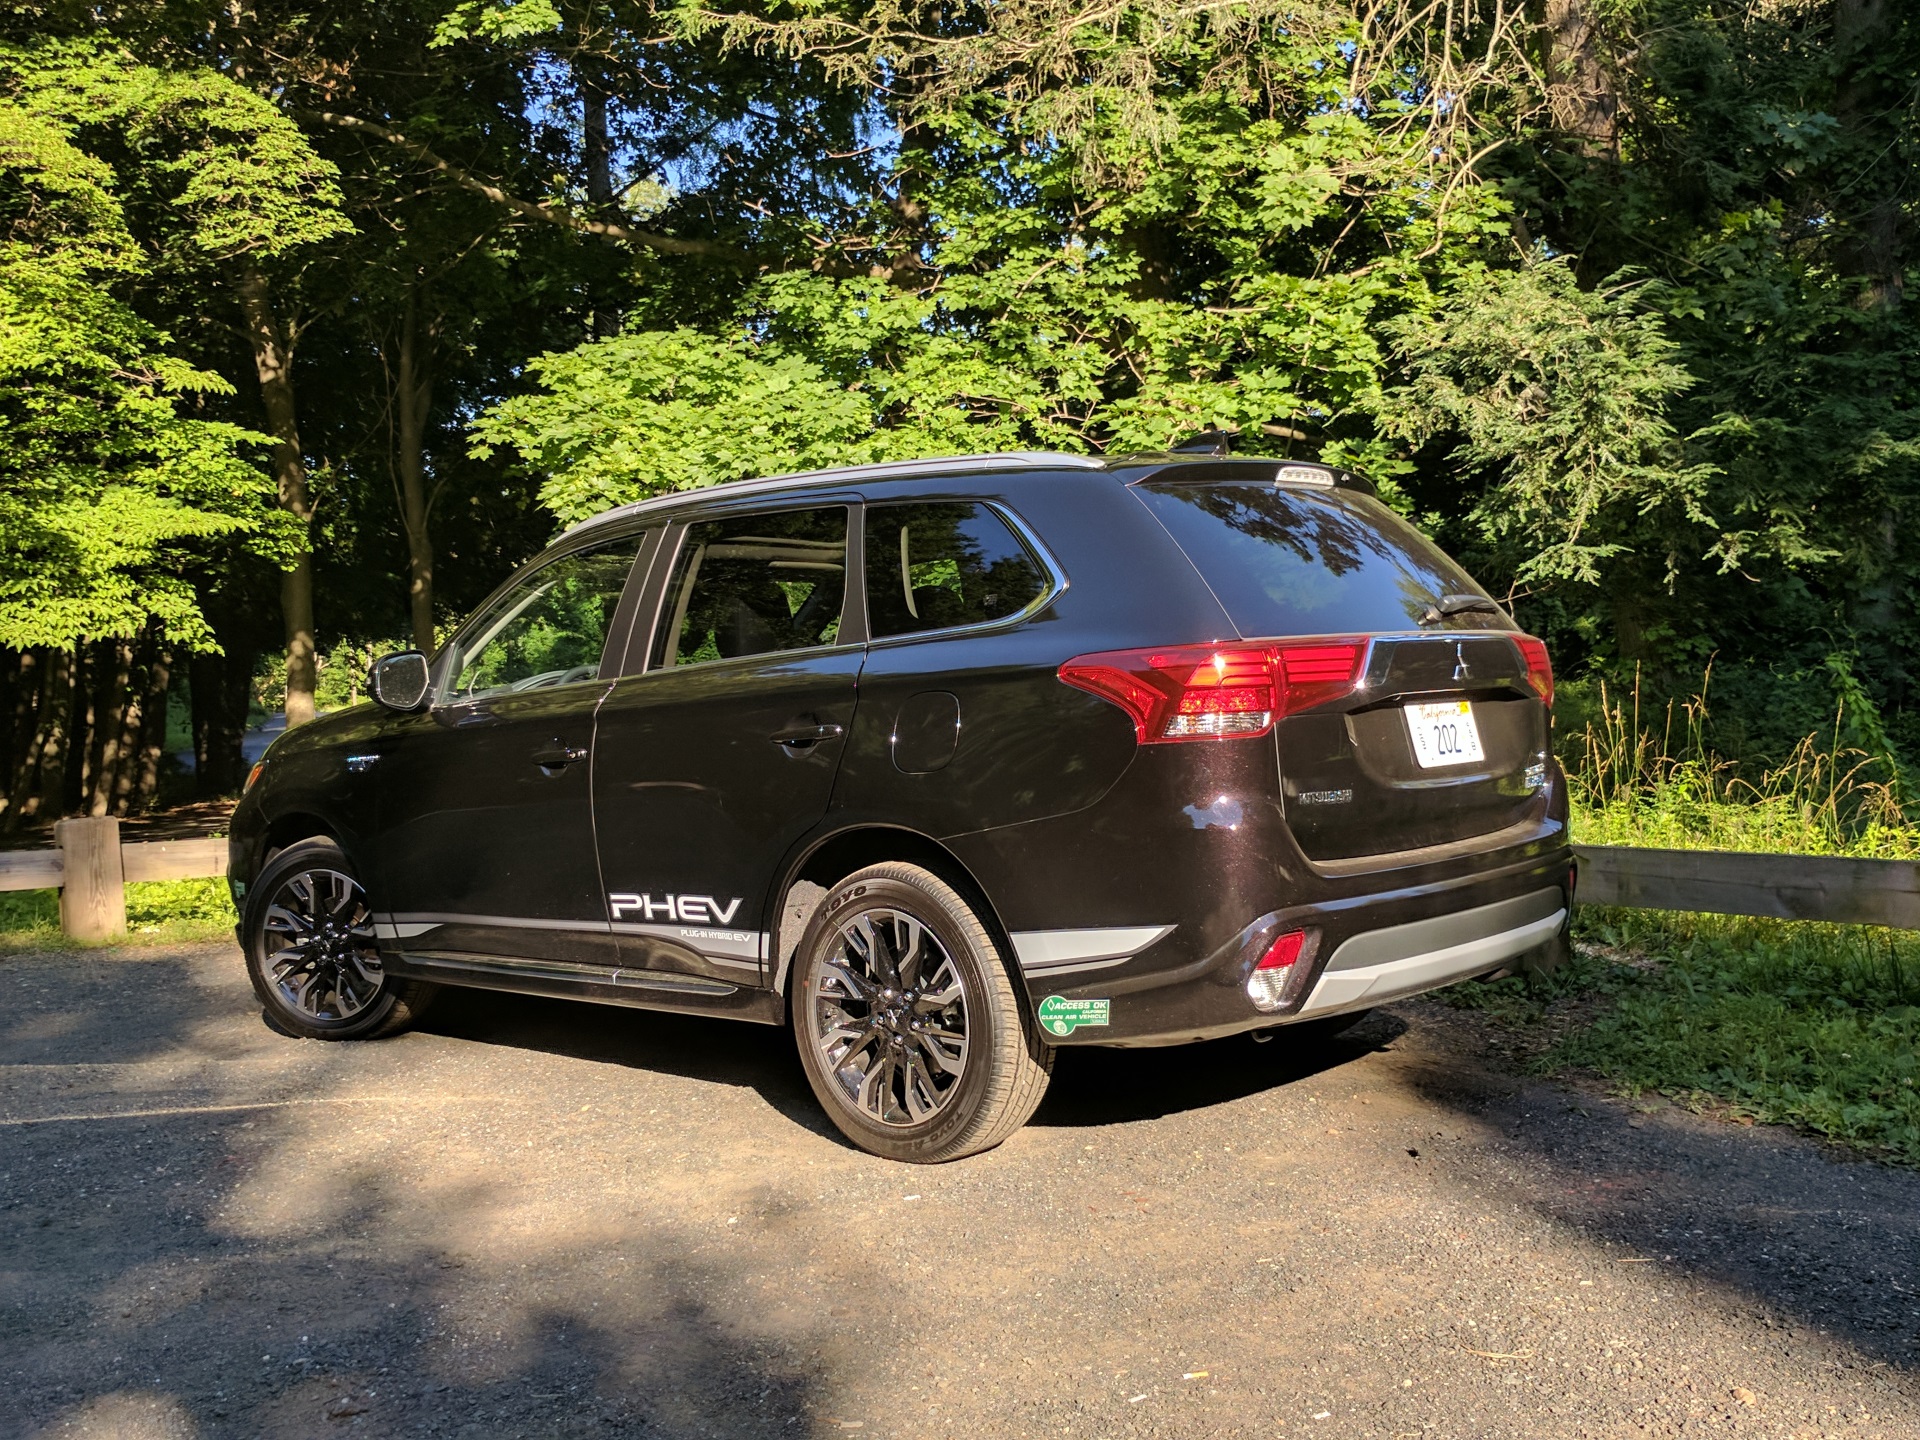 2018 mitsubishi outlander phev review lexus f hybrids and big oil skepticism of electric cars todays car news